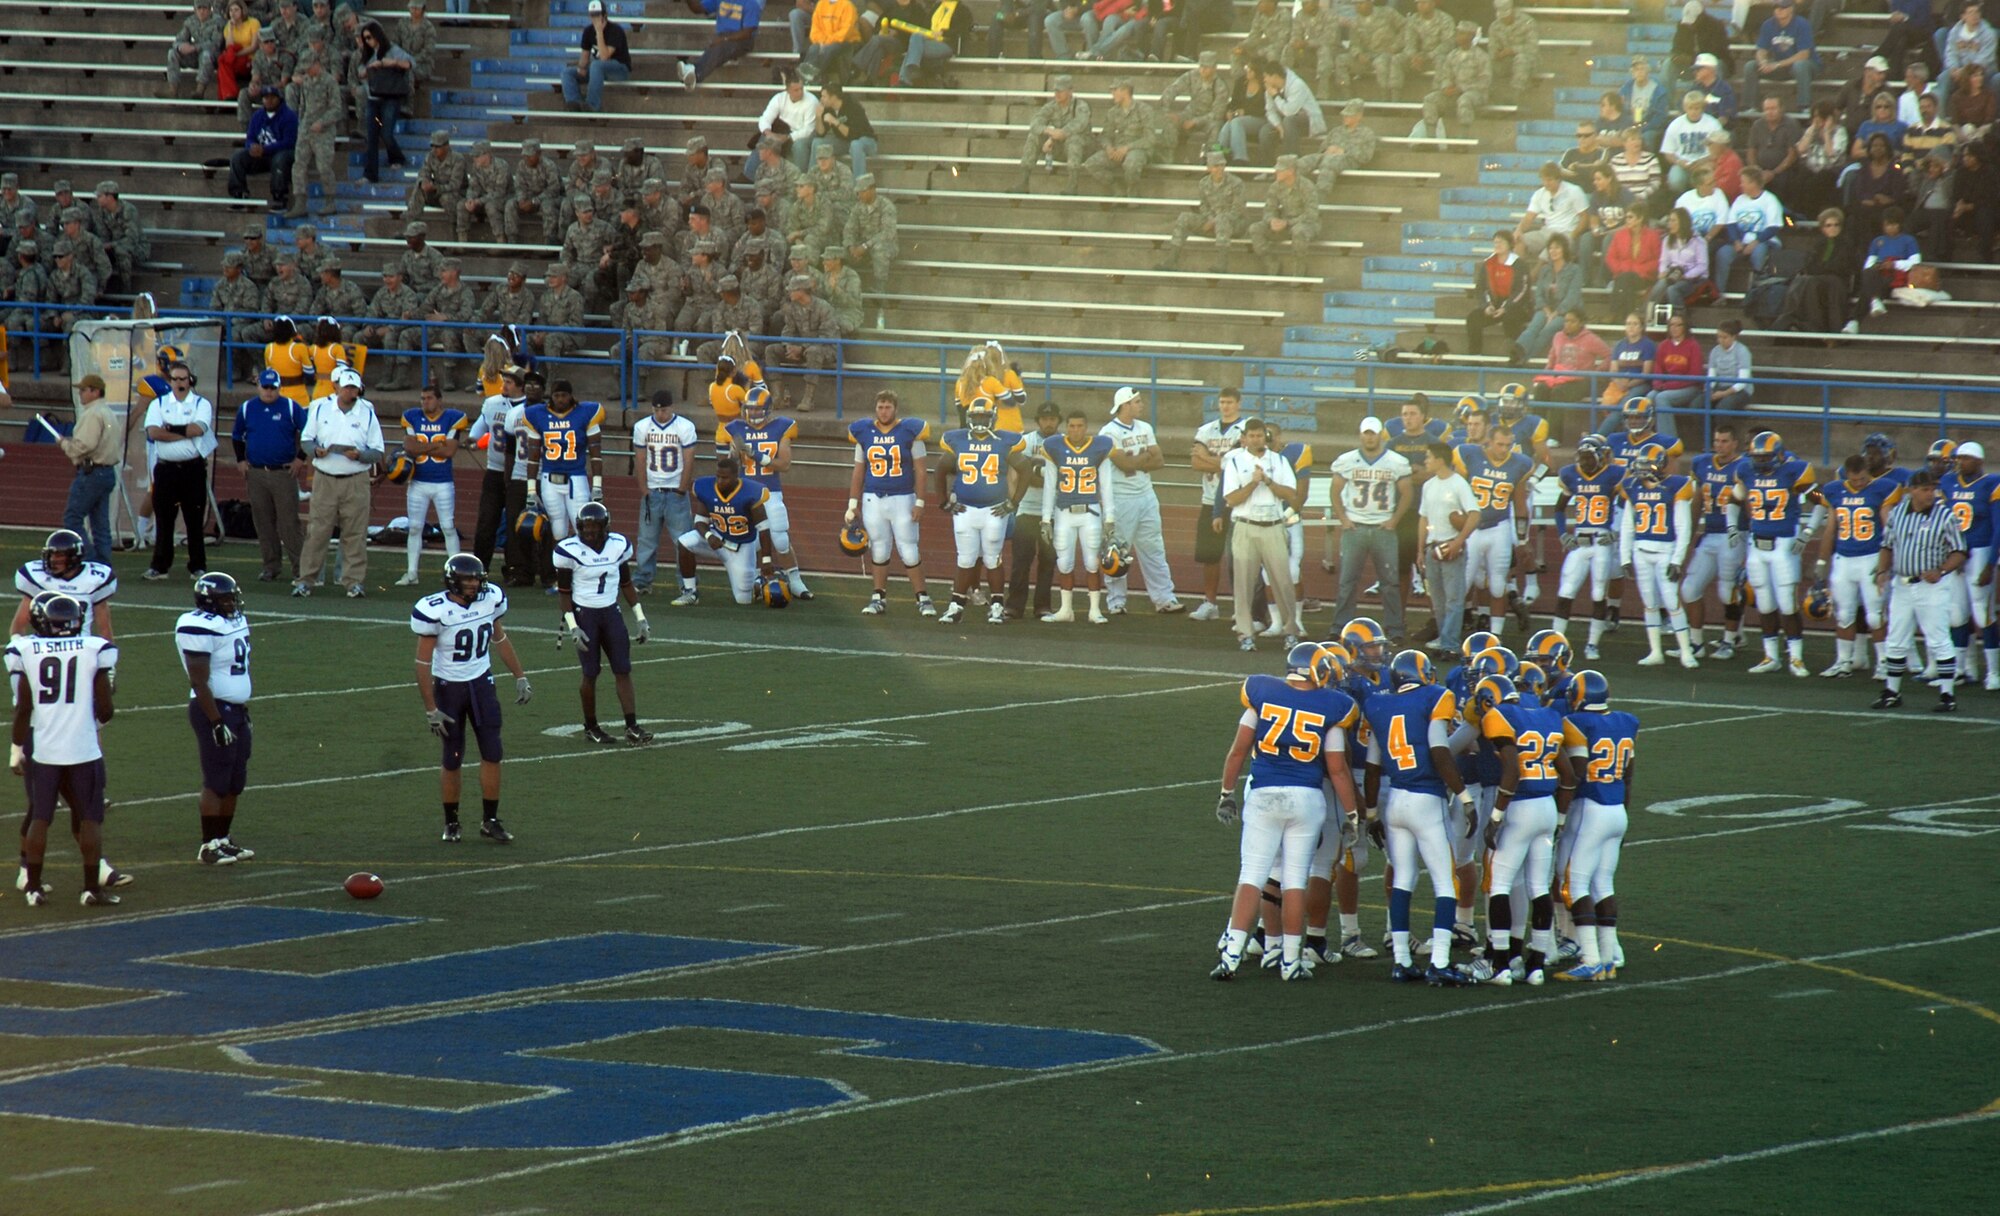 Goodfellow Air Force Base members attend an Angelo State University football game, Oct. 31, 2009.  ASU offered free admission to all active, reserve, guard and retired military in recognition of military appreciation day. (U.S. Air Force photo/Staff Sgt. Laura R. McFarlane)